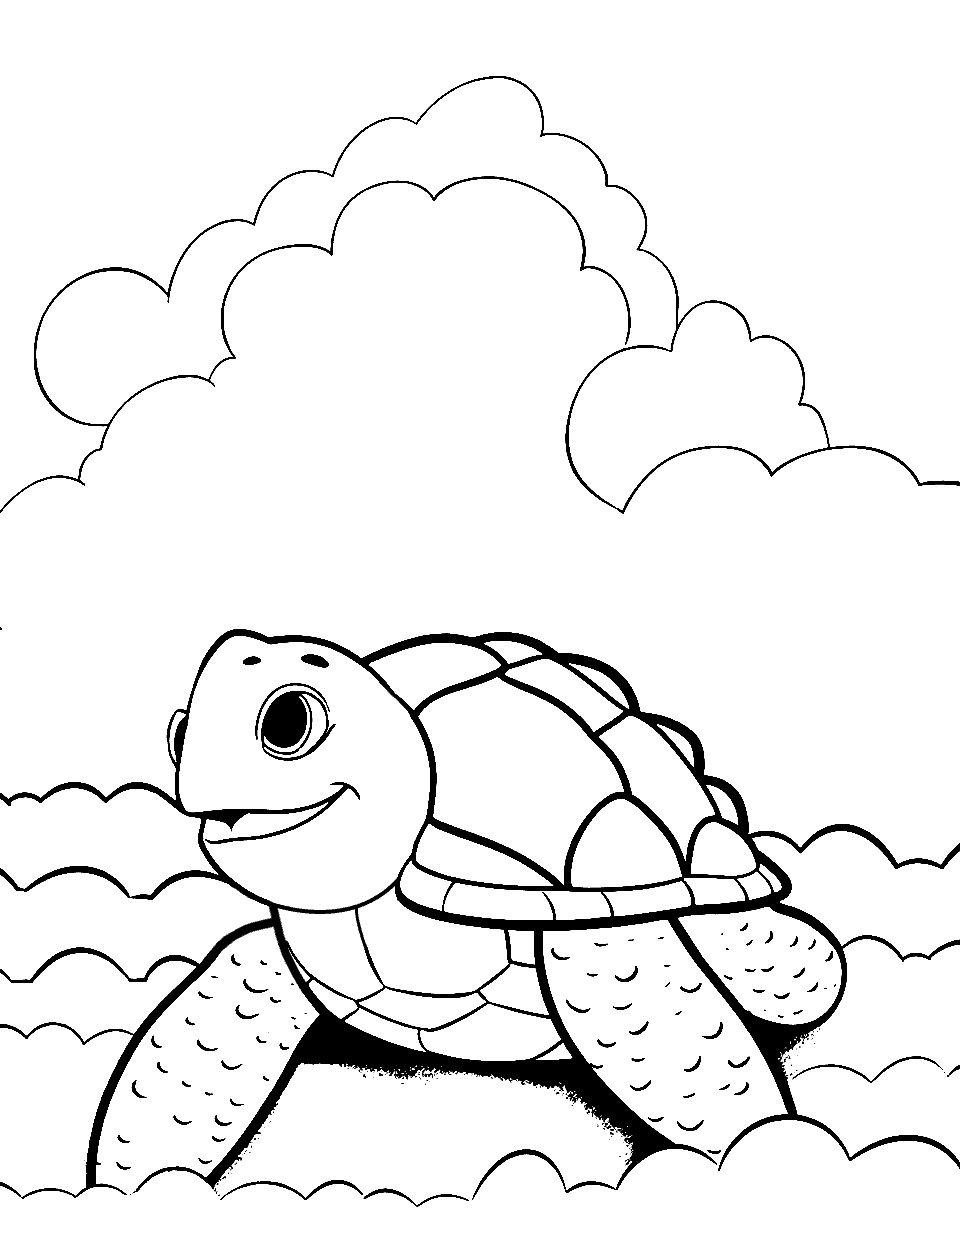 Turtle's Cloud Daydream Turtle Coloring Page - A turtle floating on top of a cloud.